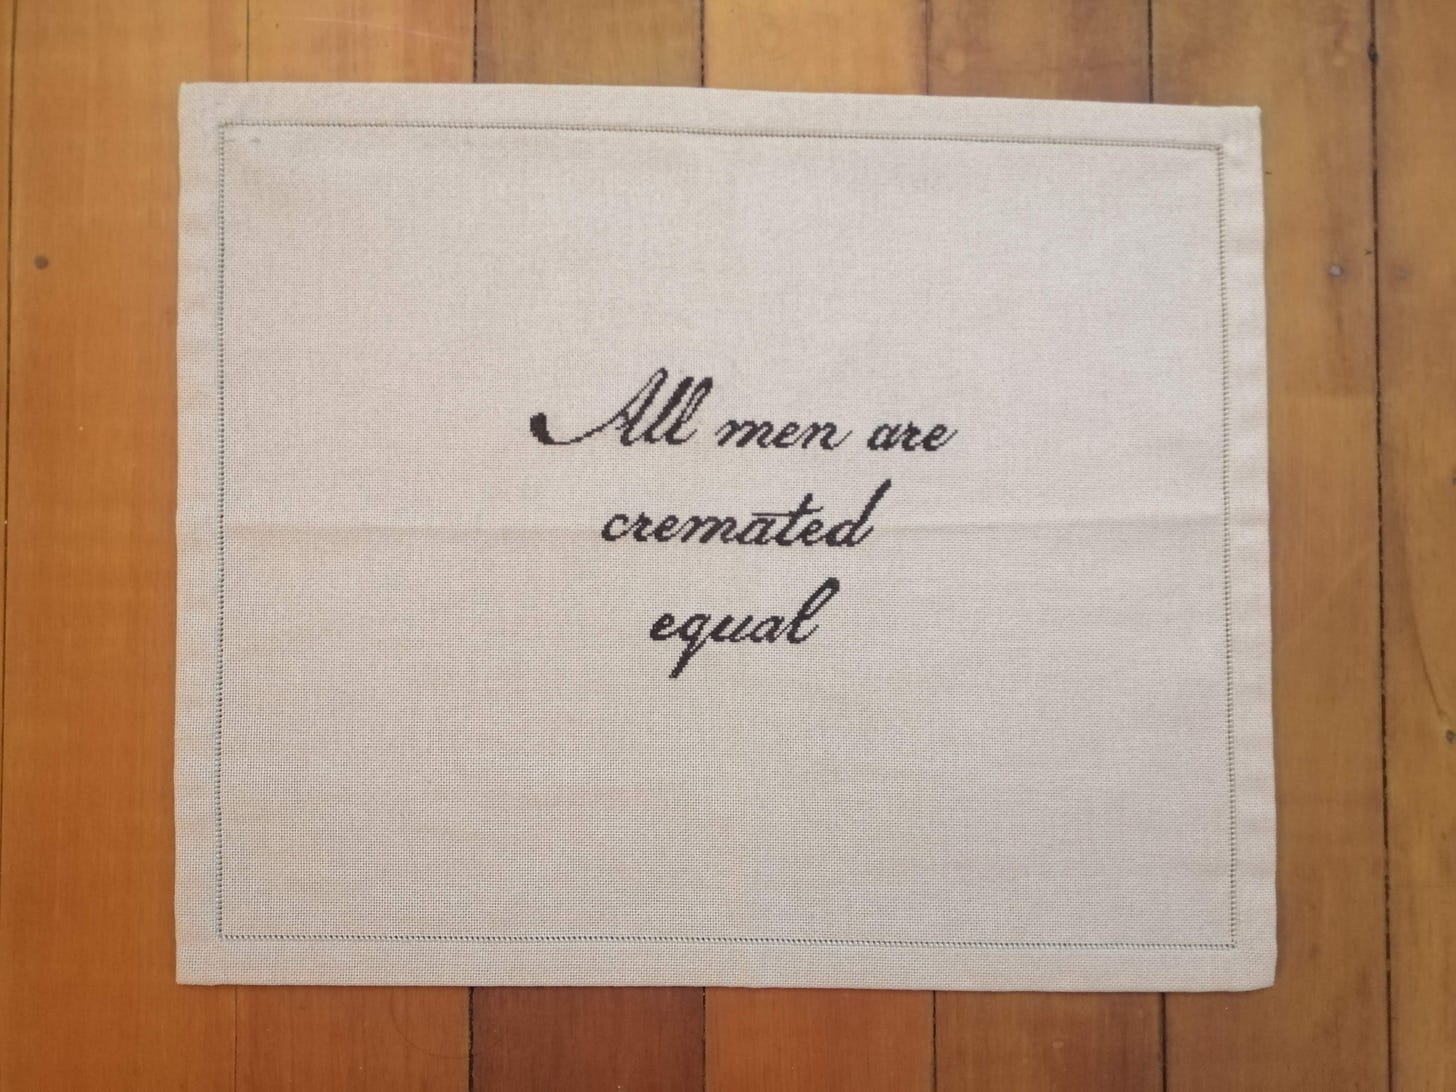 Cream linen placemat with dark brown text in a handwritten script "All men are cremated equal"